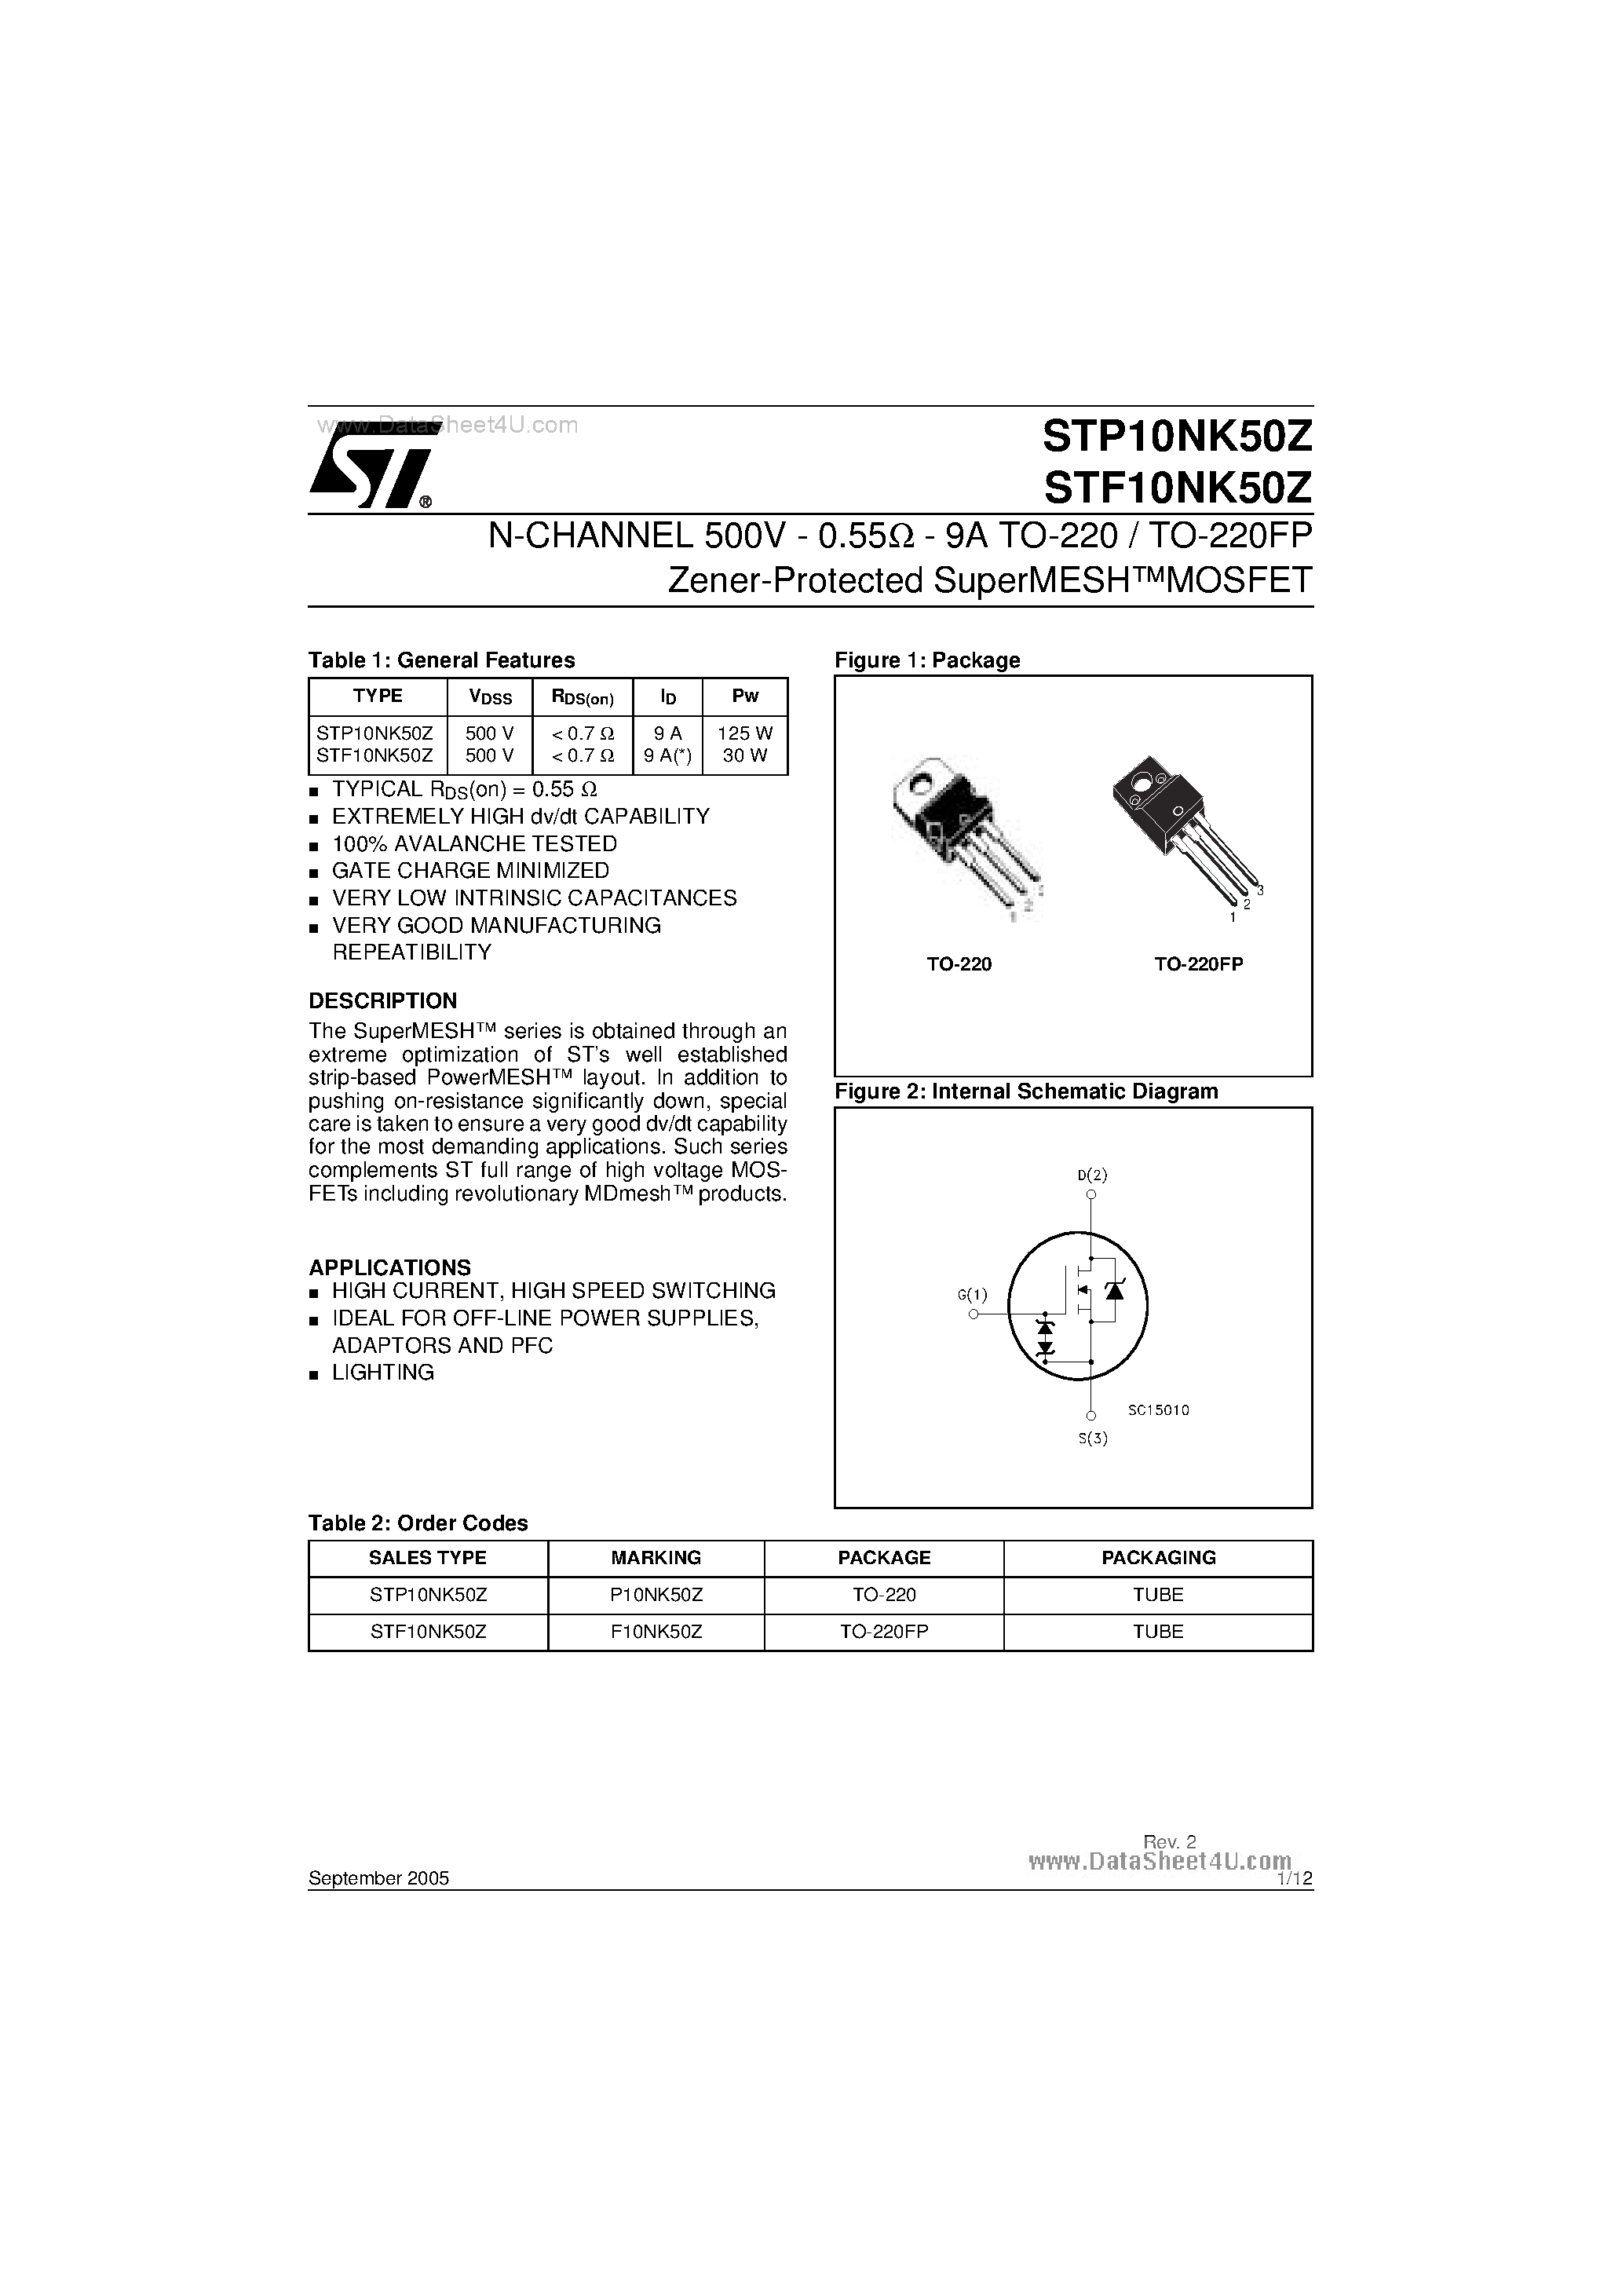 Datasheet STP10NK50Z - N-CHANNEL Zener-Protected SuperMESH MOSFET page 1